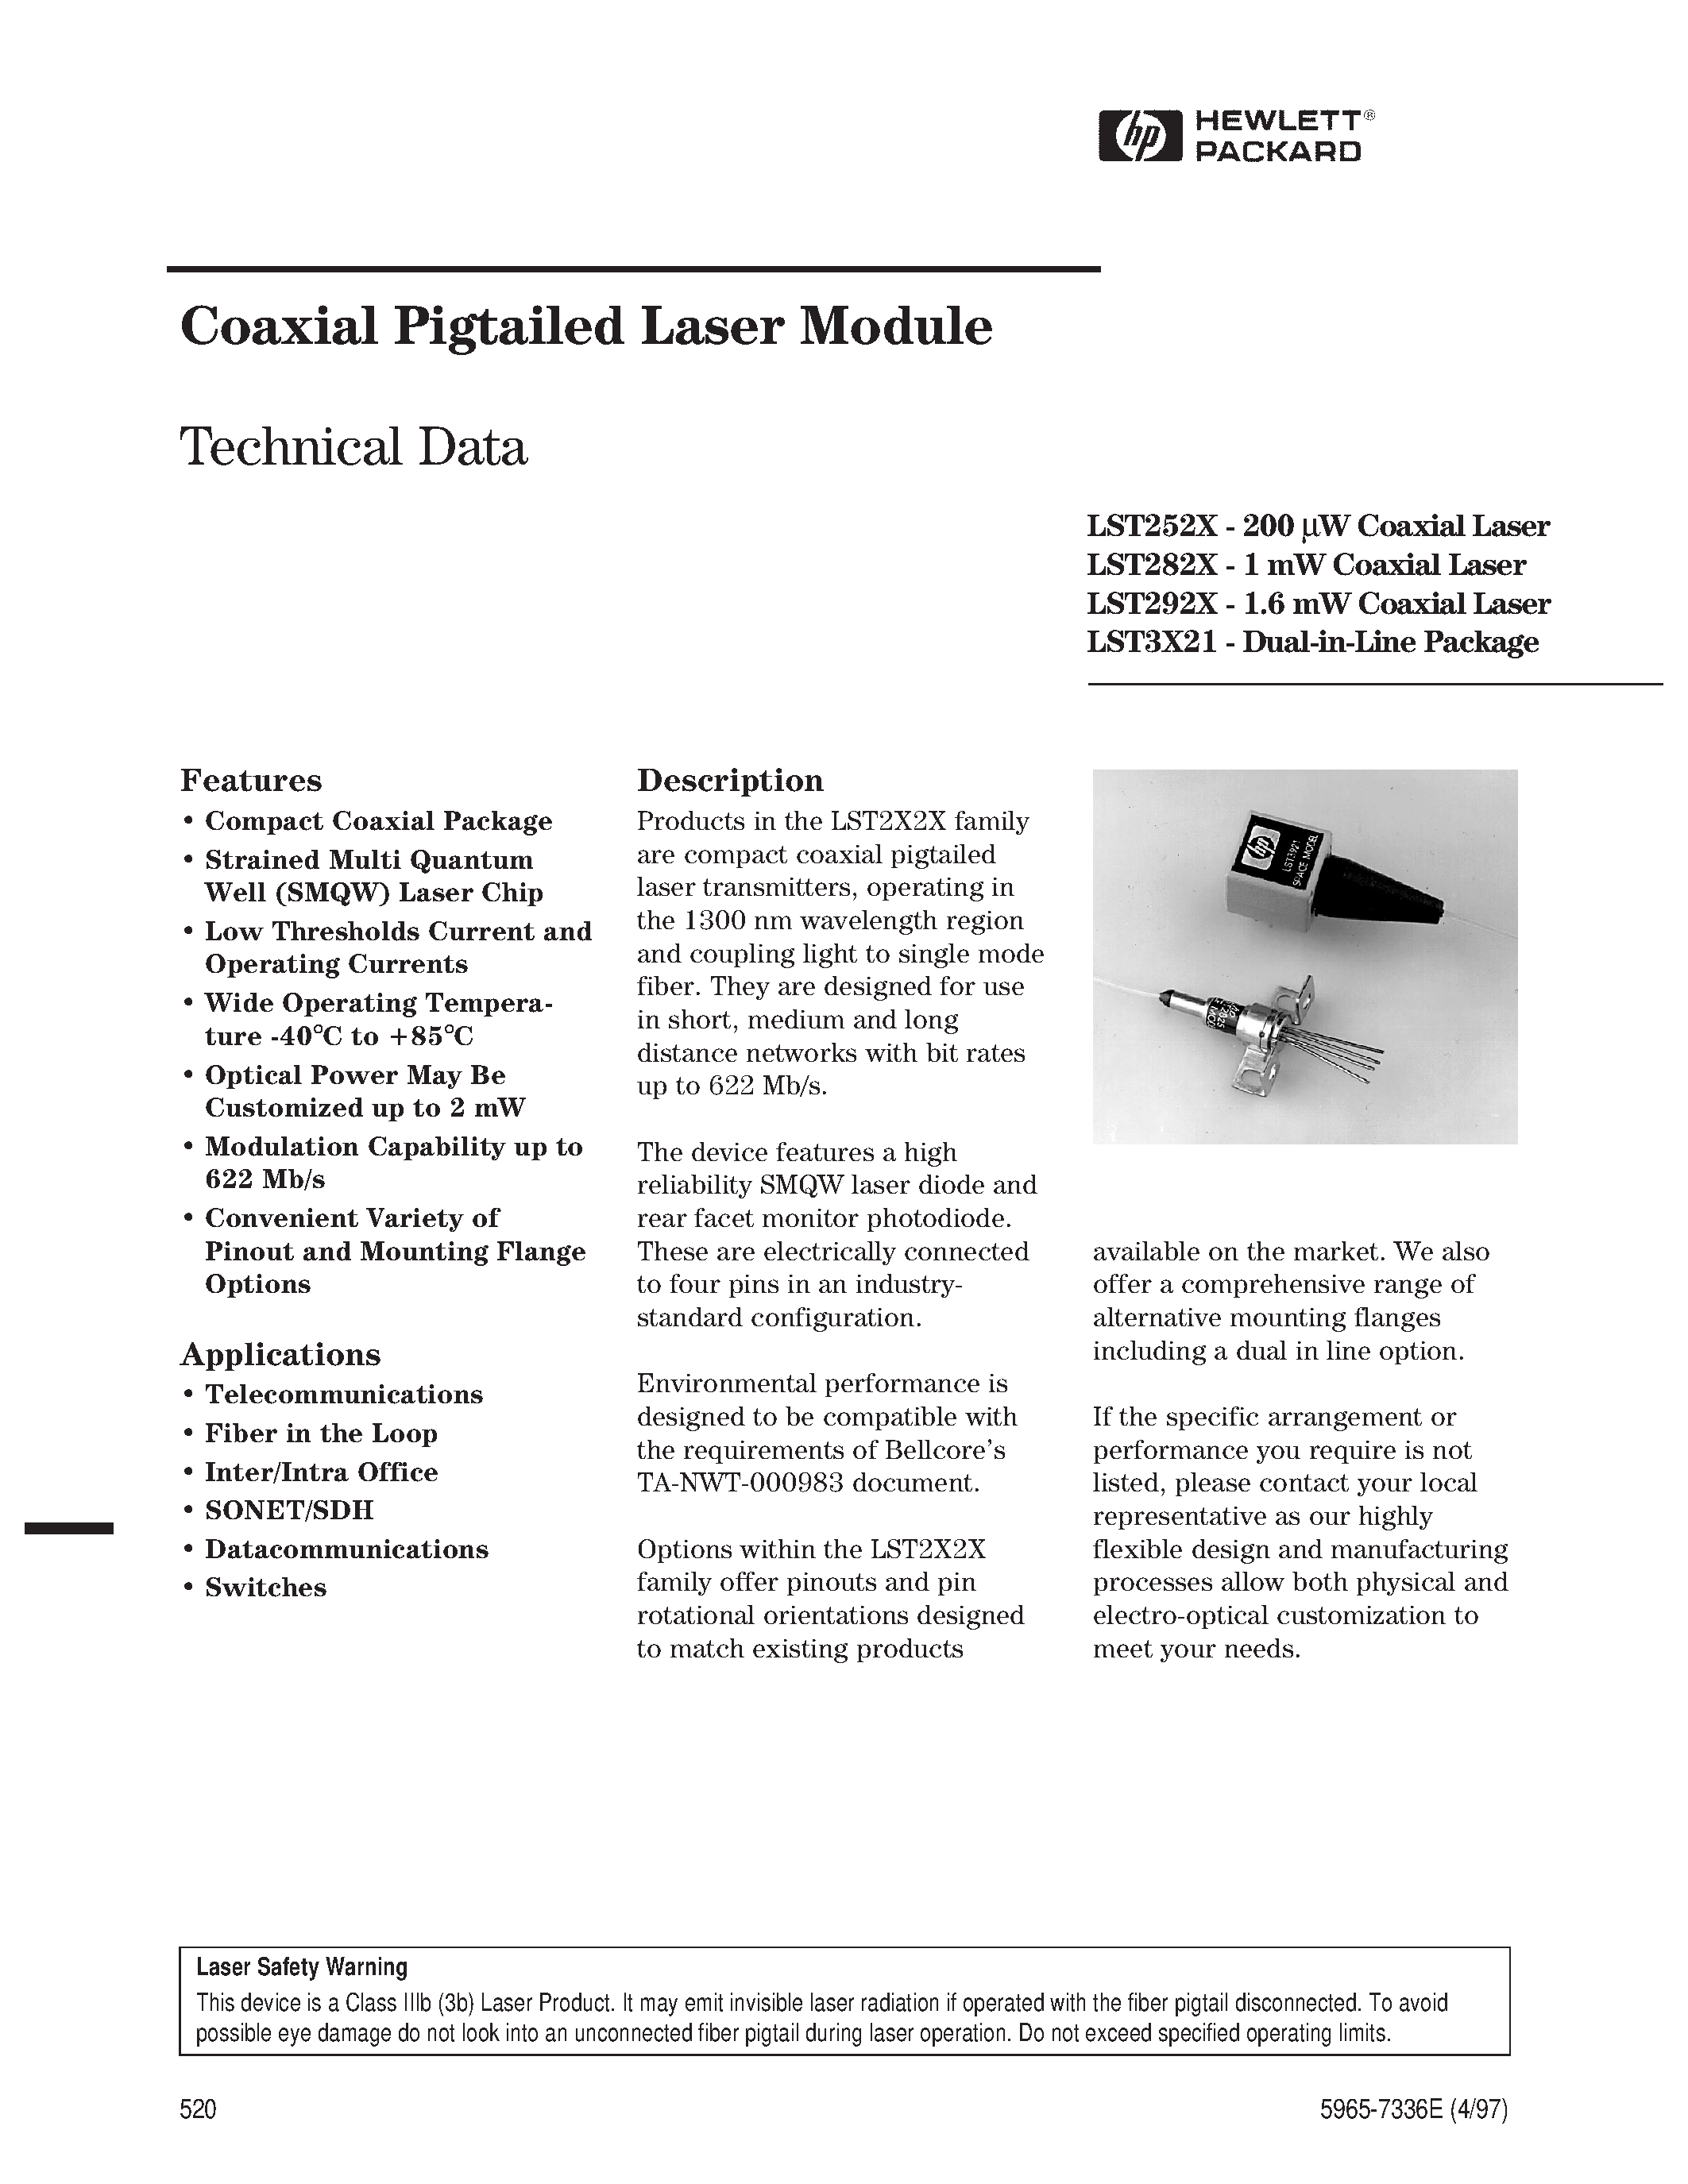 Datasheet LST2925-S4-B-FP - Coaxial Pigtailed Laser Module page 1